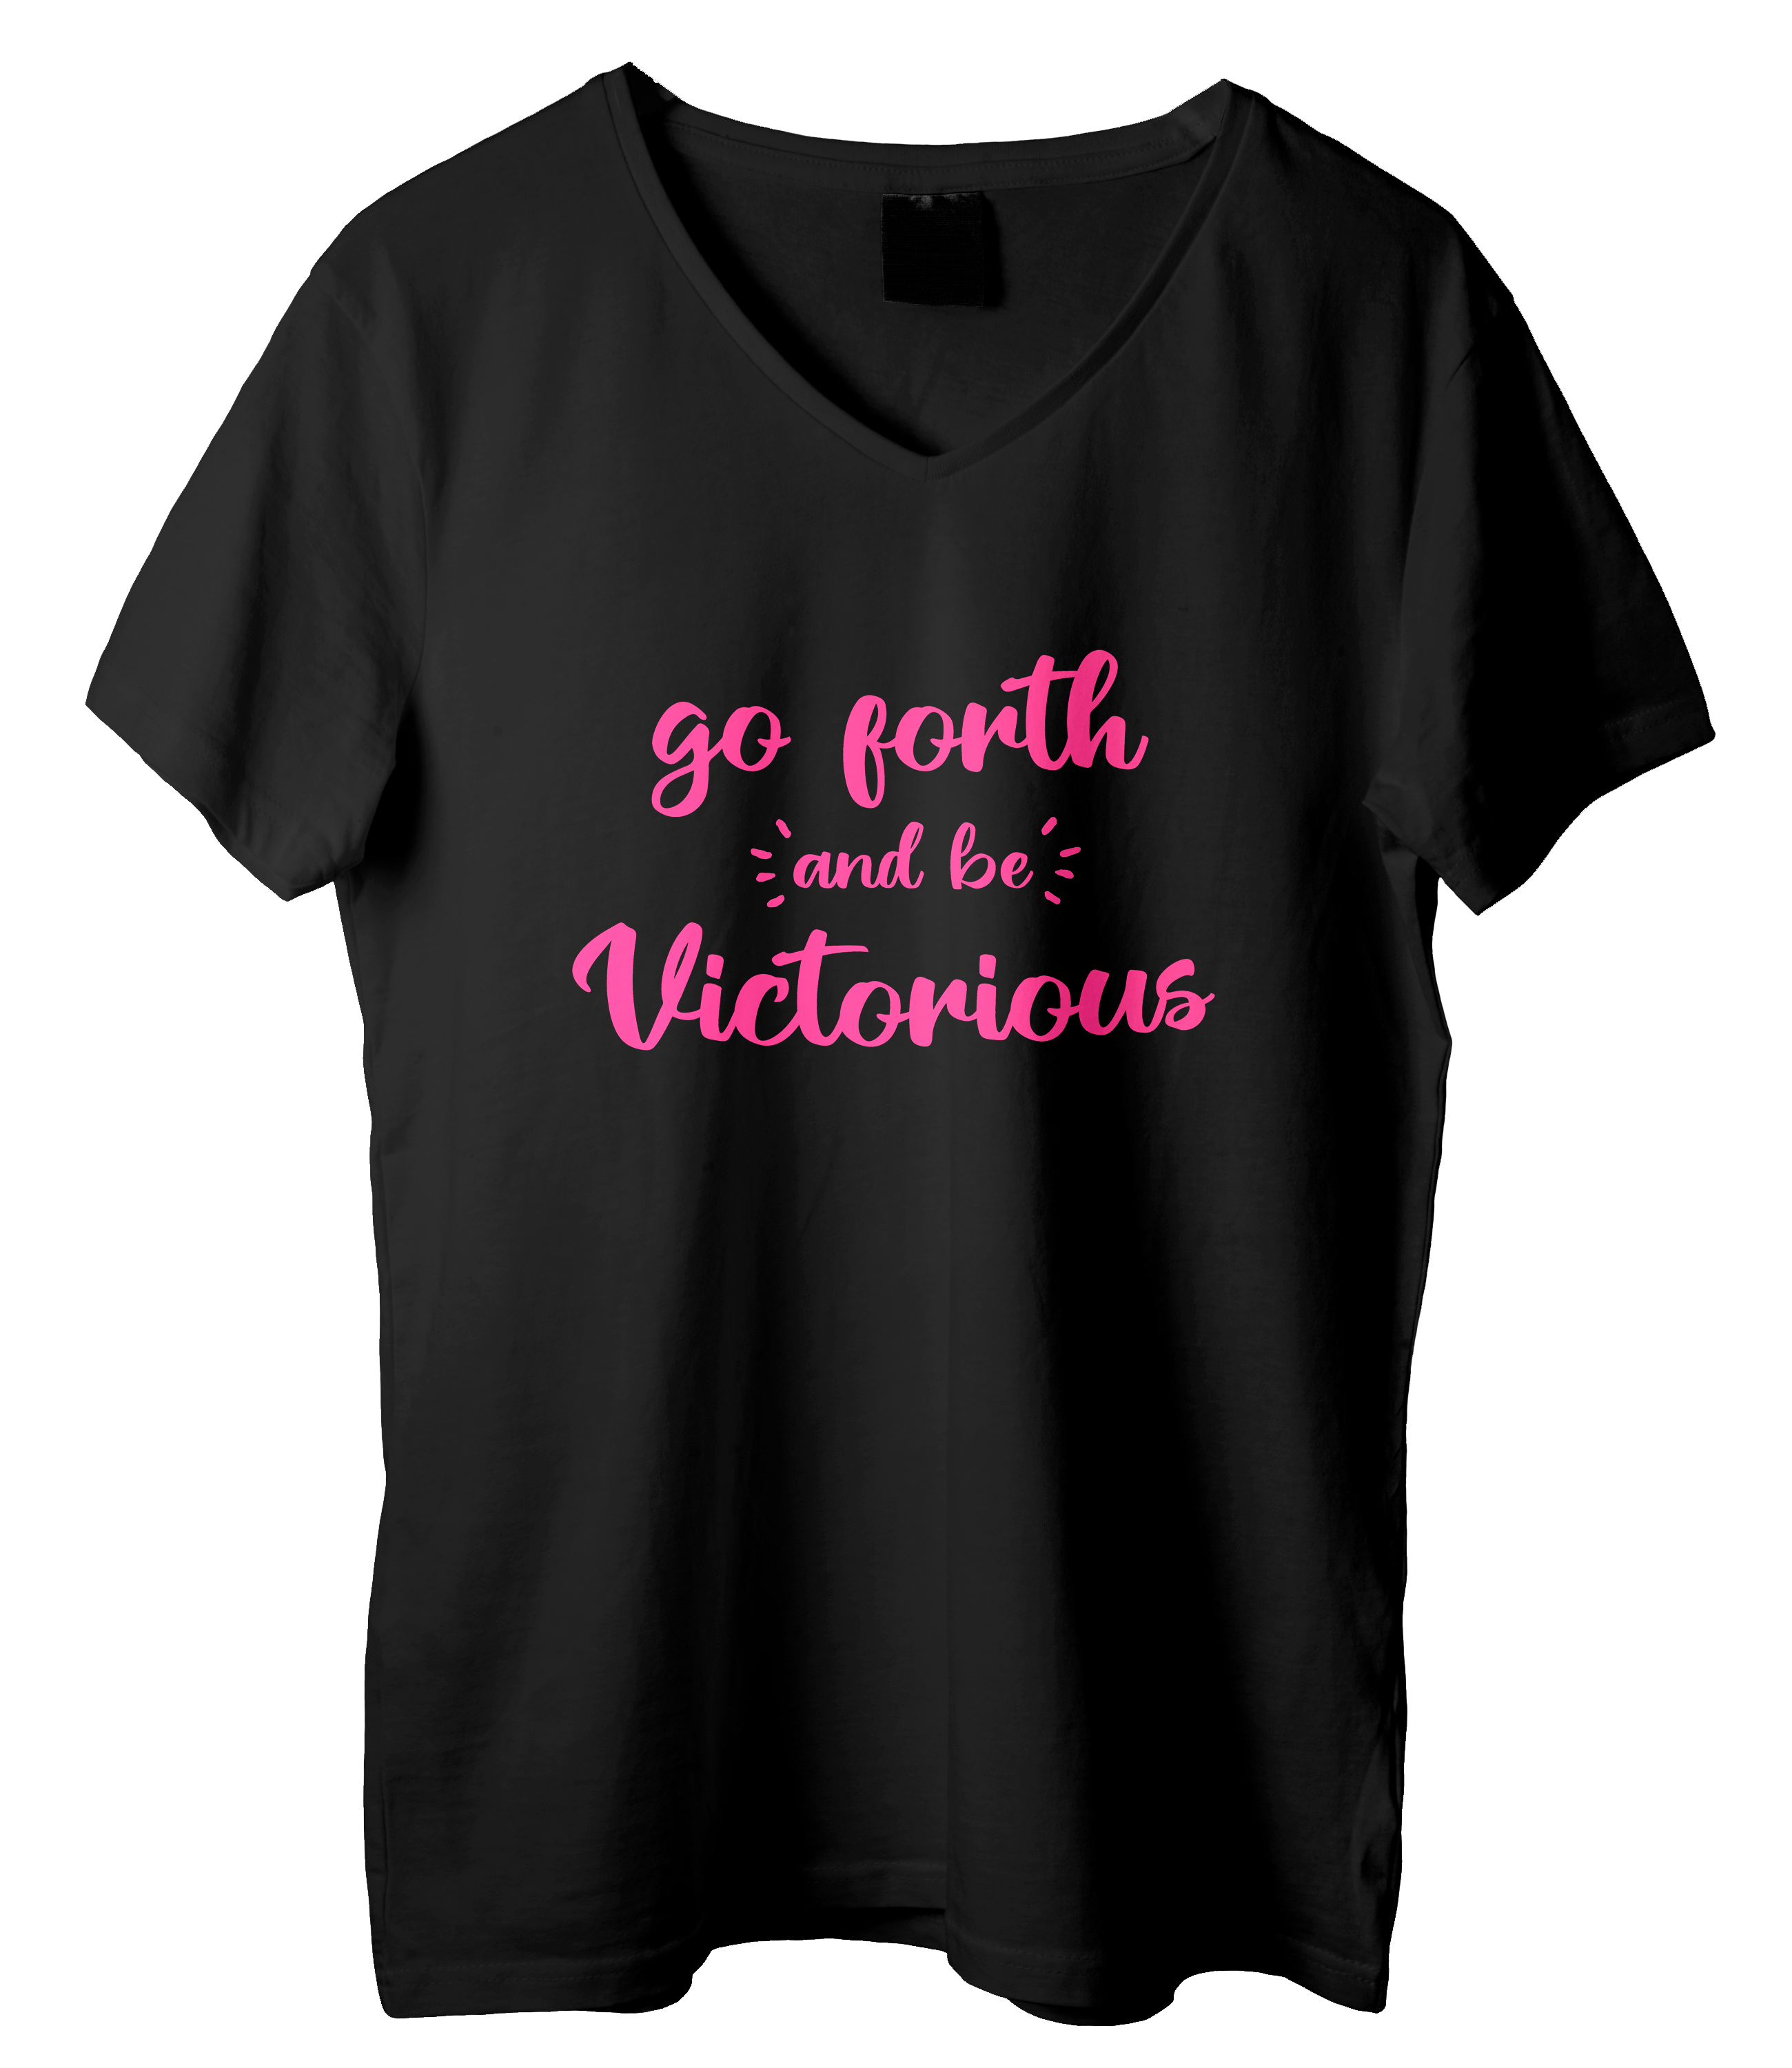 Go Forth and Be Victorious Shirt